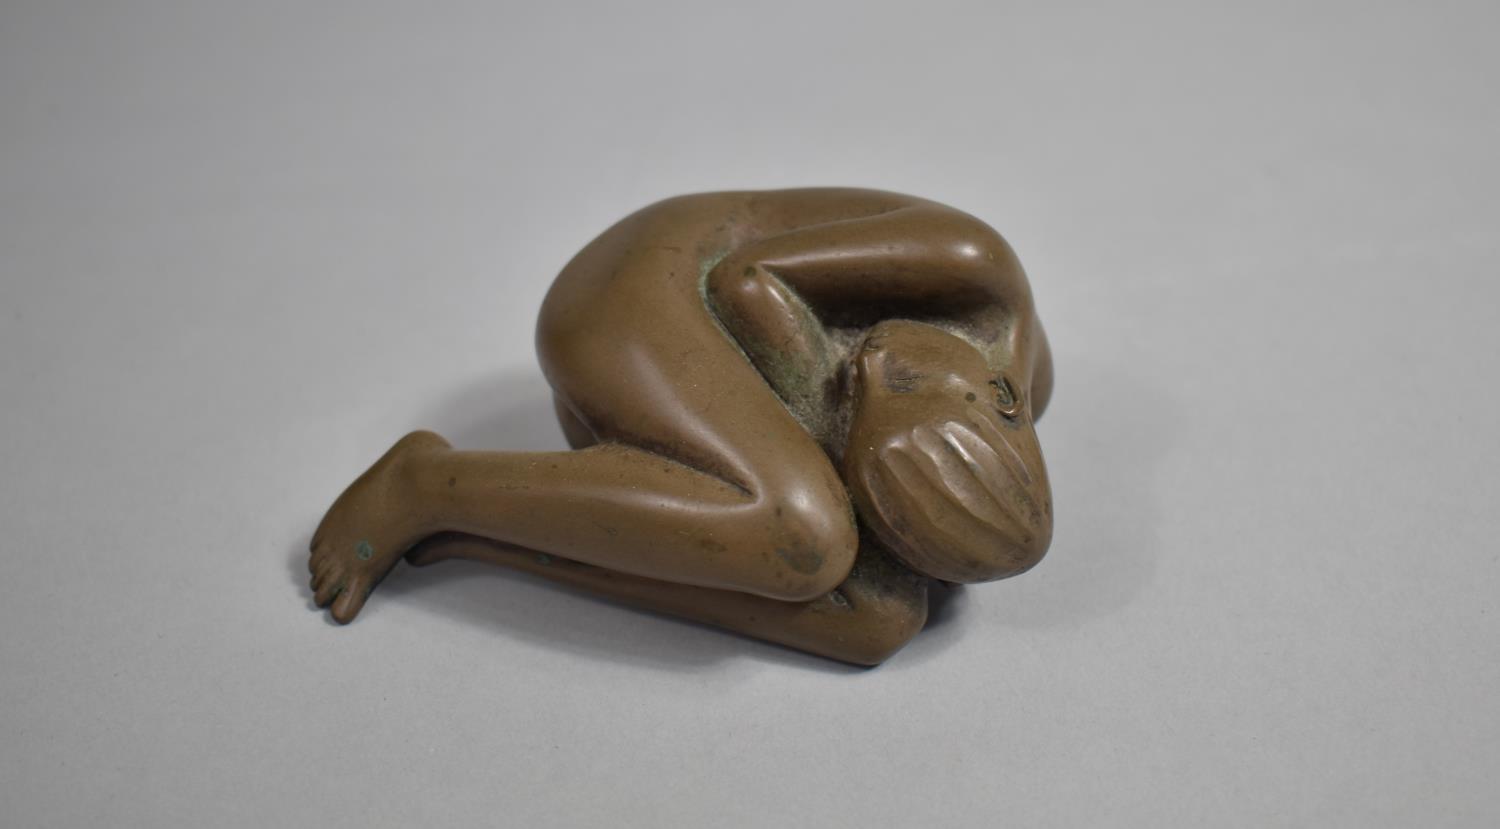 A Bronzed Study of a Curled Up Sleeping Figure, Signed D J Scadwell - Image 4 of 5